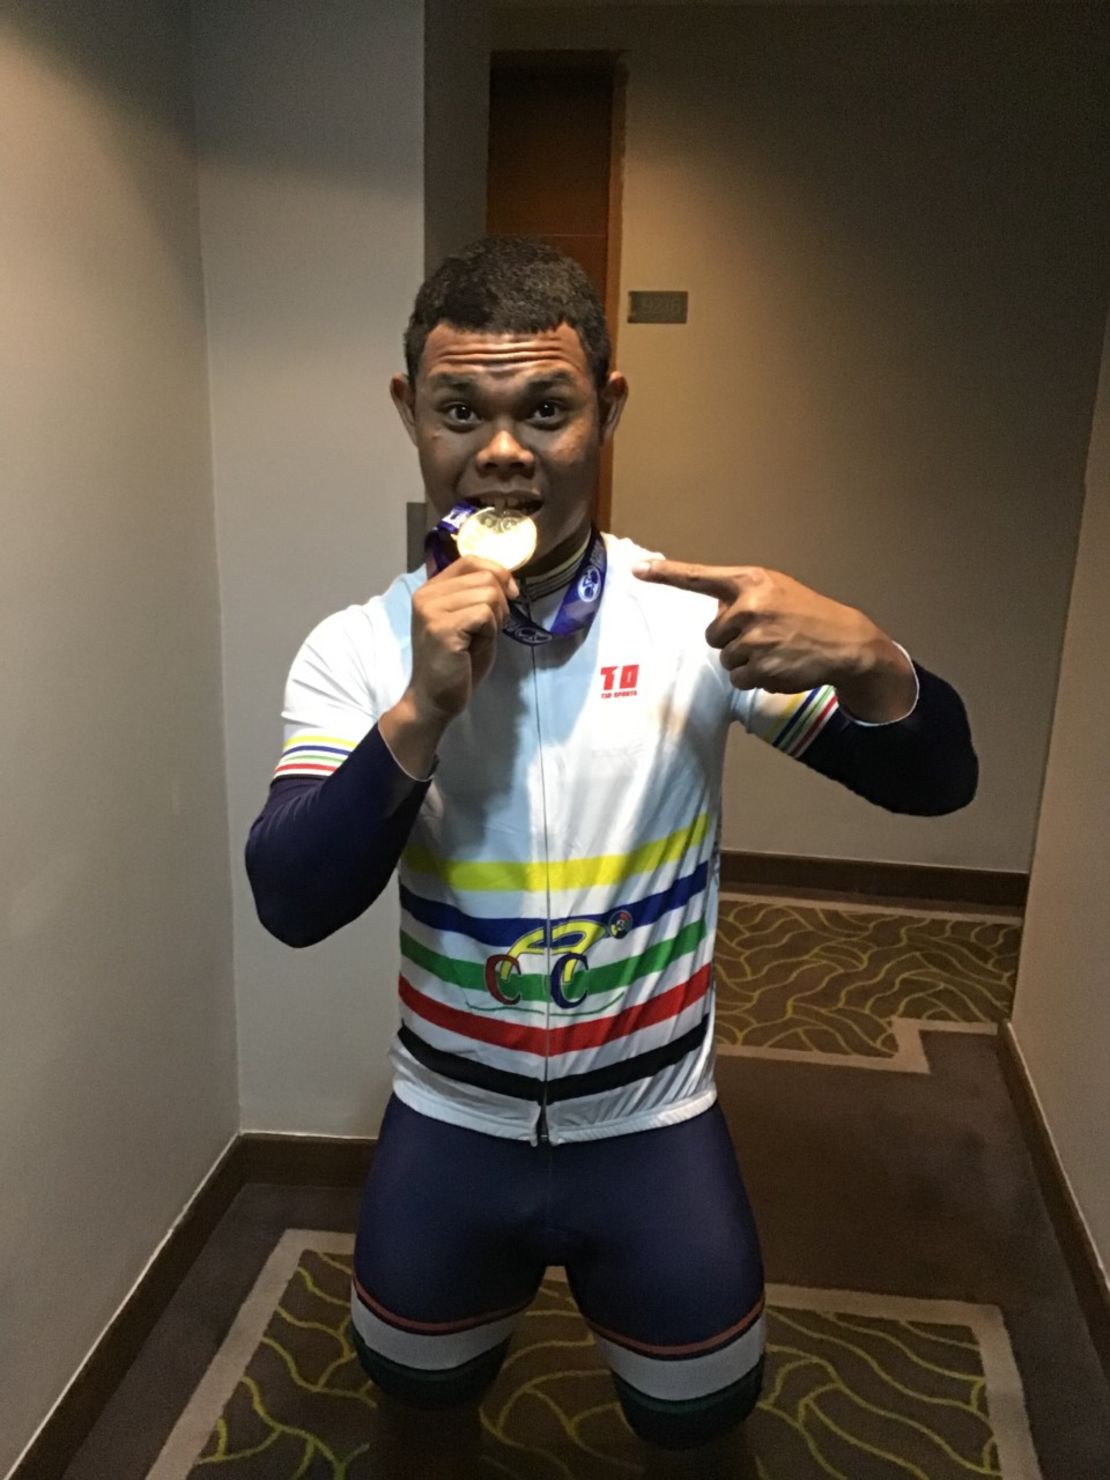 Tasting success: Esow shows off his gold medal from the world junior track championships.